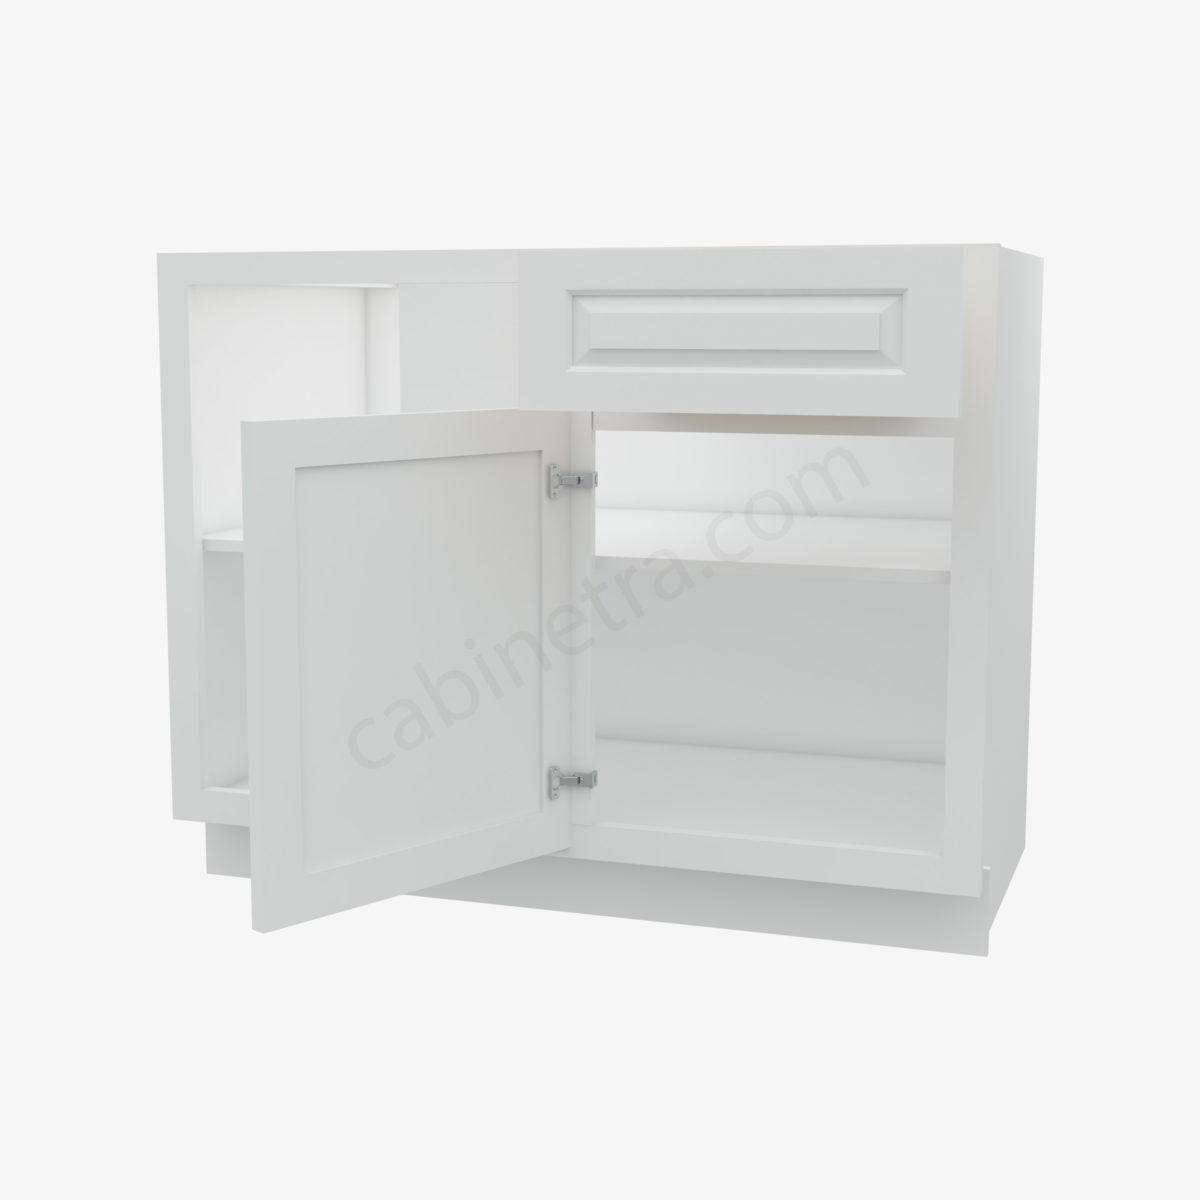 GW BBLC45 48 42W 5  Forevermark Gramercy White Cabinetra scaled